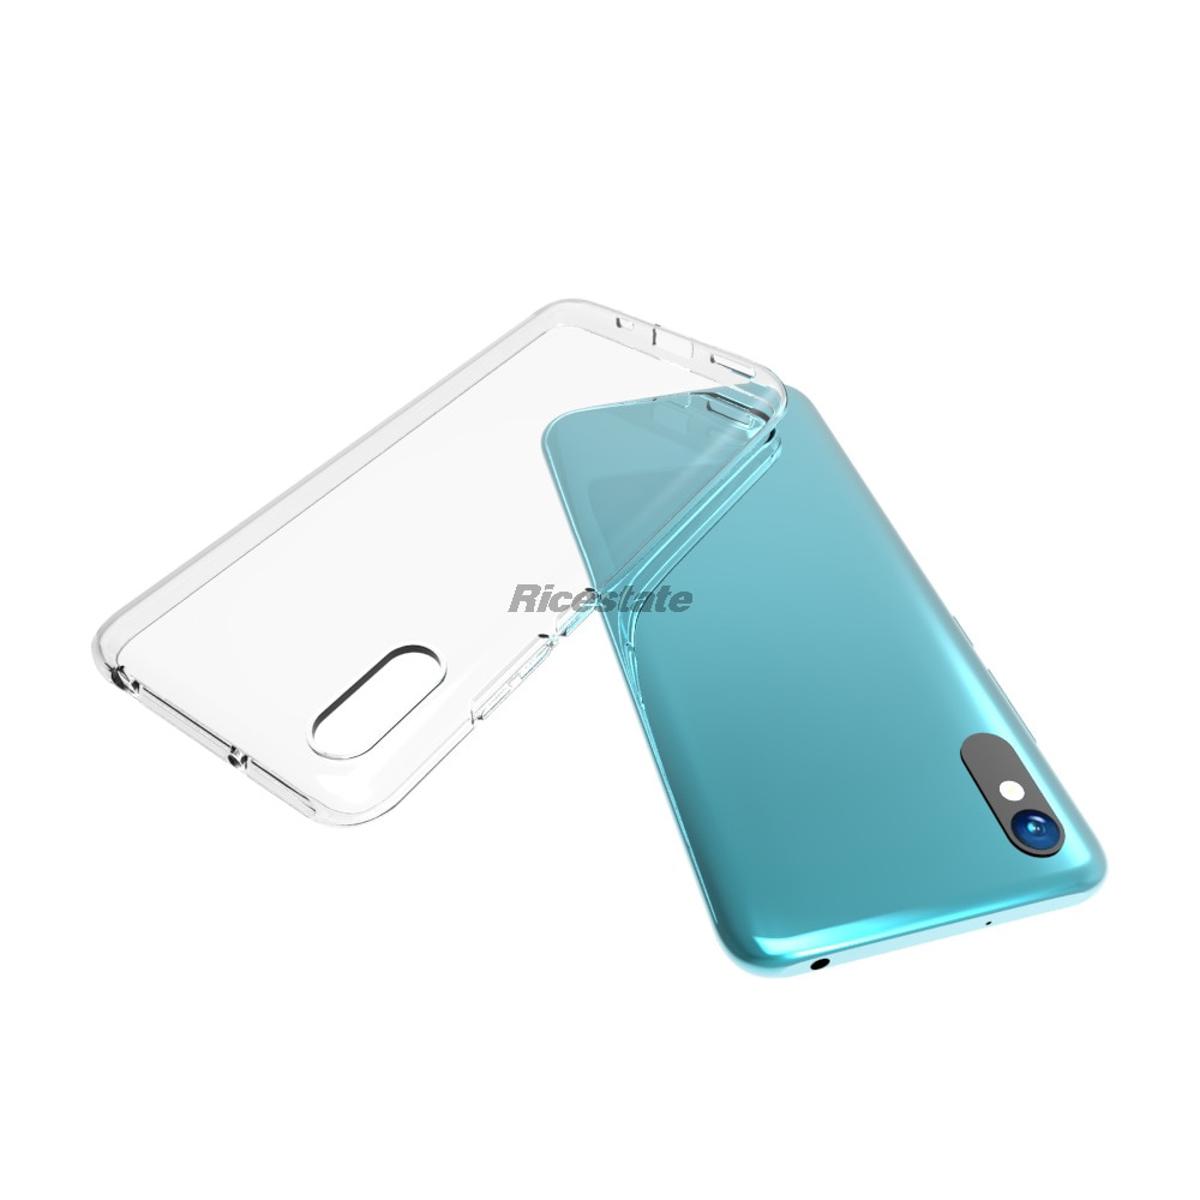 Anoowkoa TPU Case Xiaomi Redmi 10C Case Clear Ultra Crystal Thin Transparent  Protective Back Cover Soft Flexible Bumper Hybrid Silicone Case[Shock  Absorption] price in Egypt,  Egypt